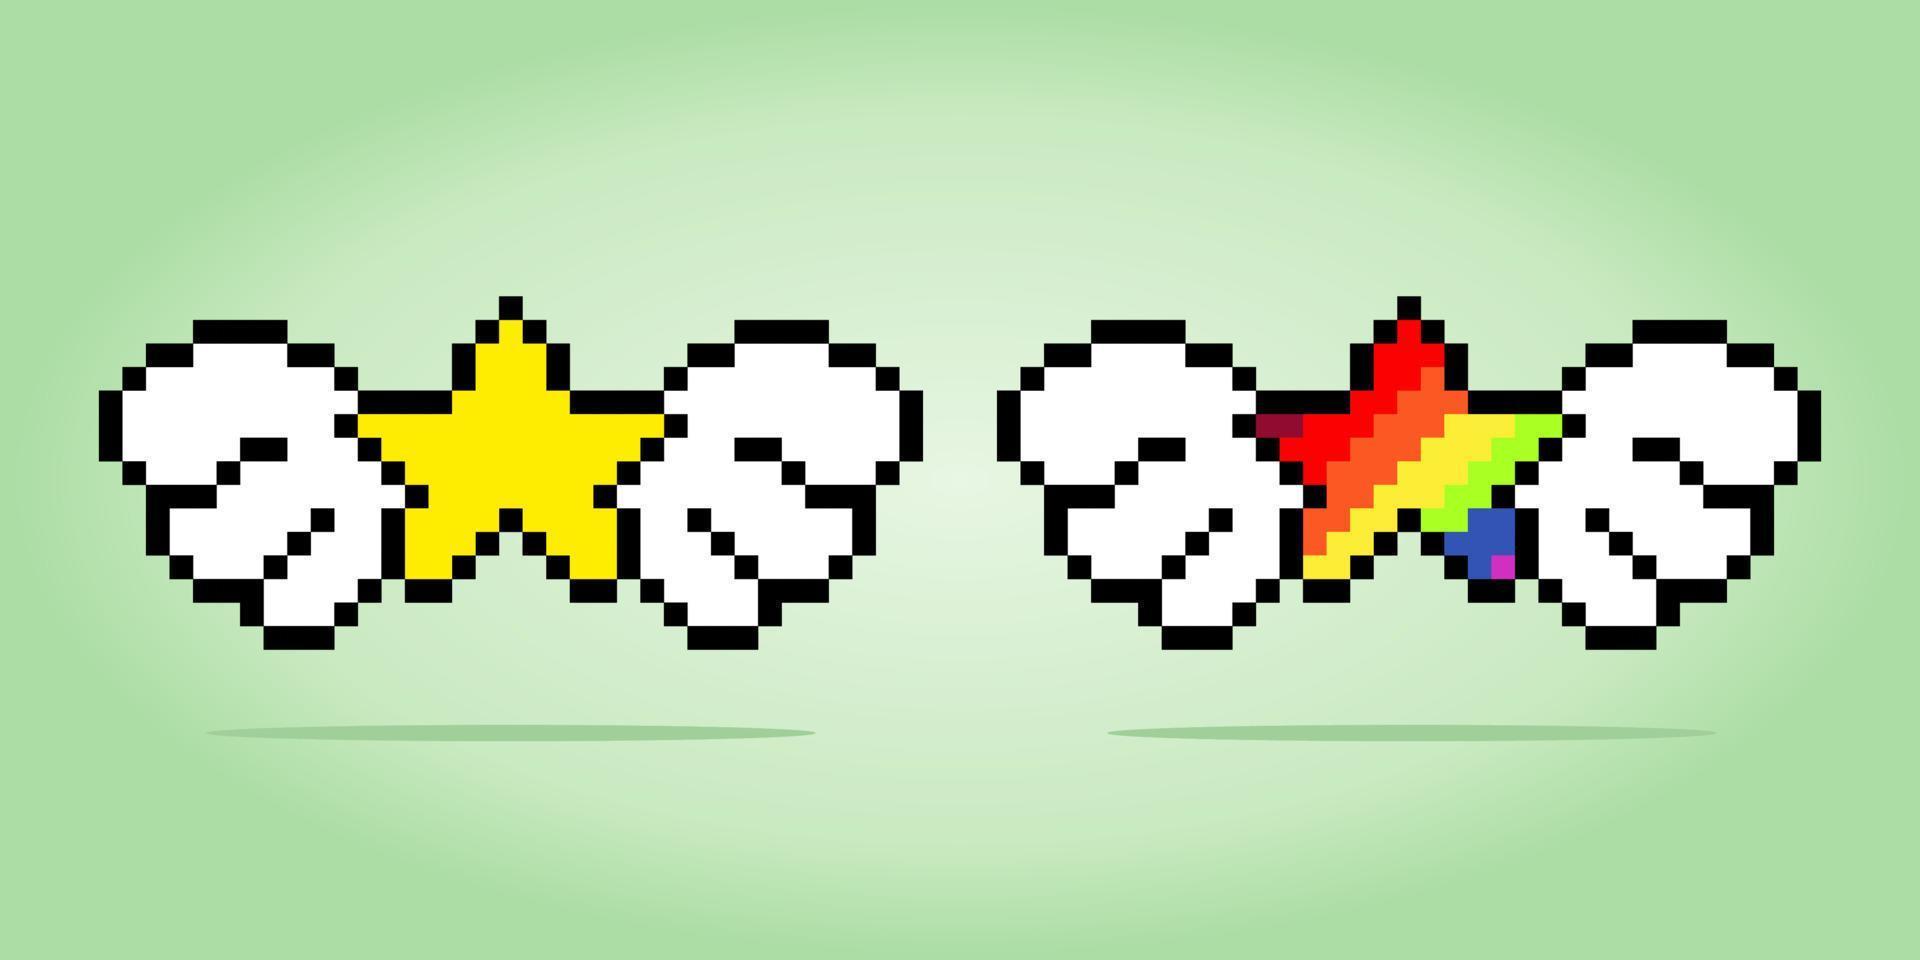 8 bit pixel of adorable yellow and rainbow star with wings, for game assets and cross stitch patterns in vector illustrations.